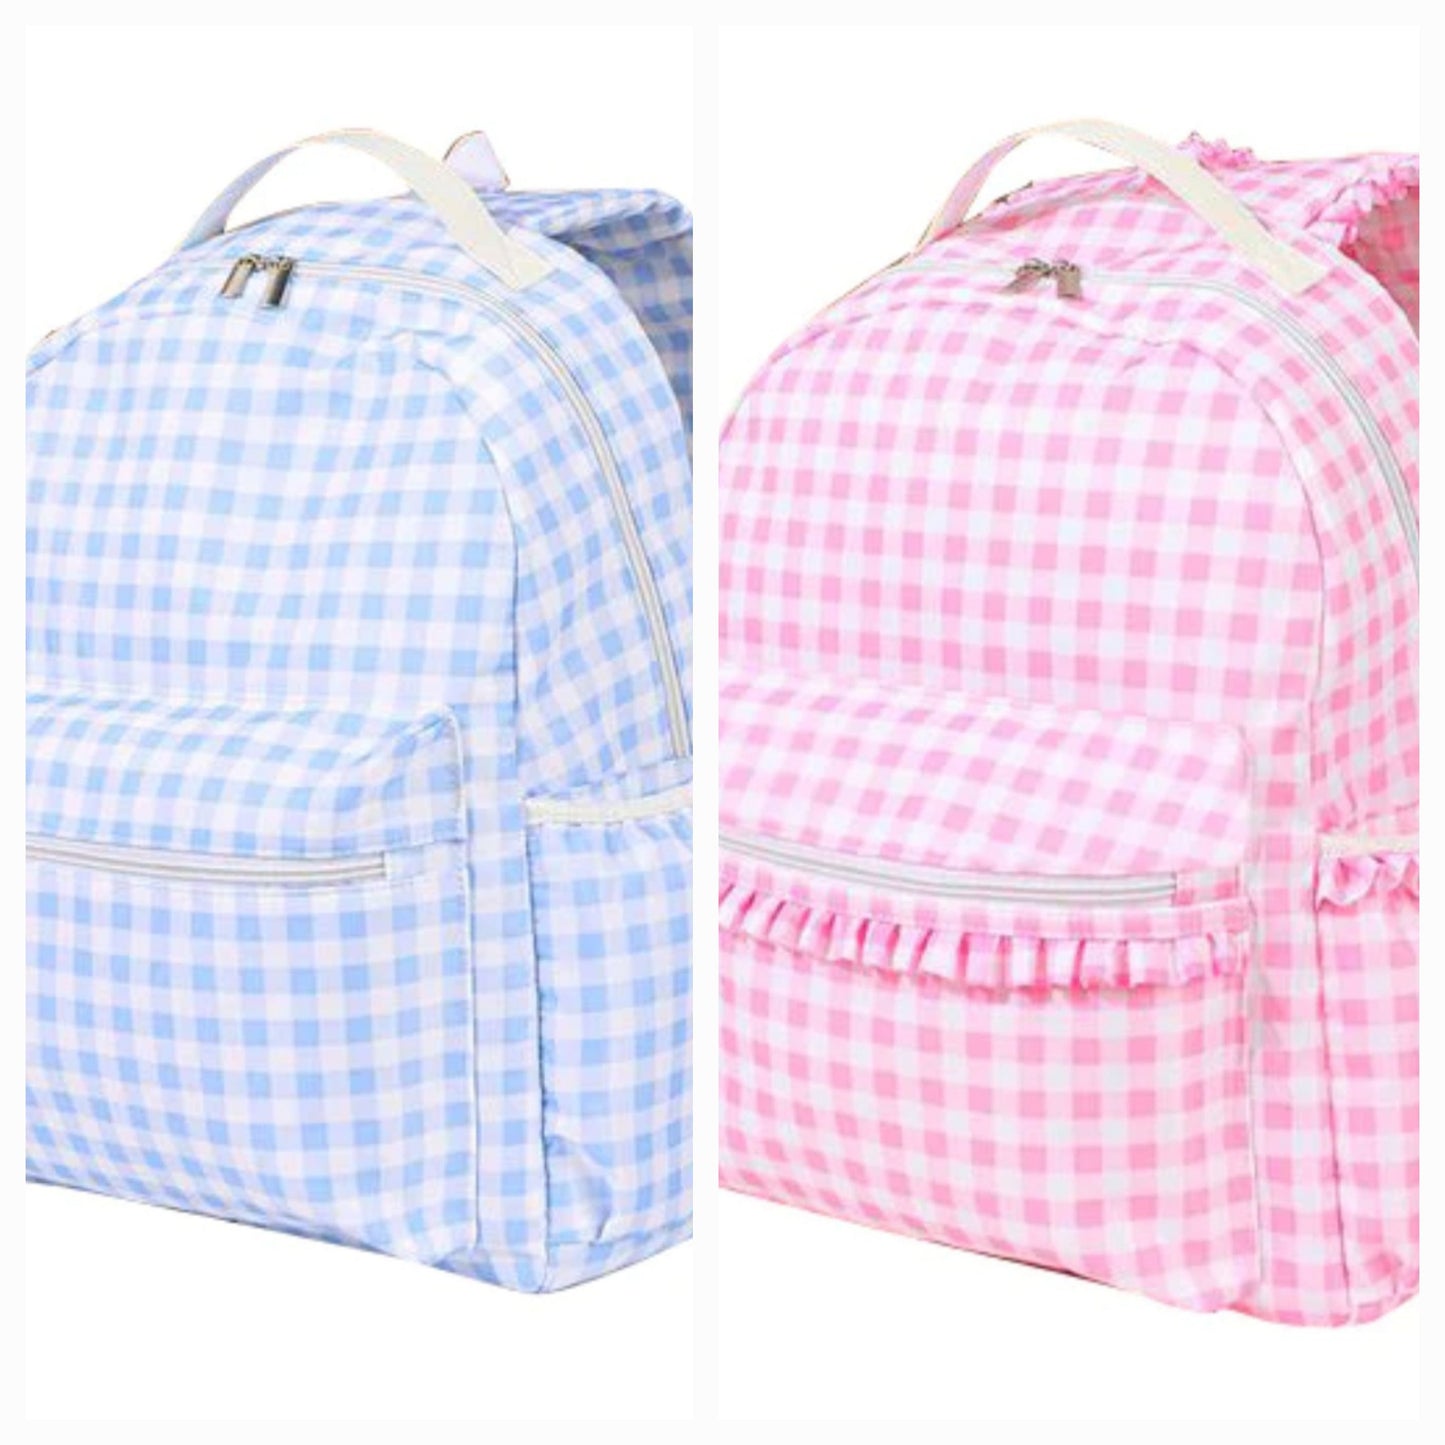 Checkered bookbag in pink or blue